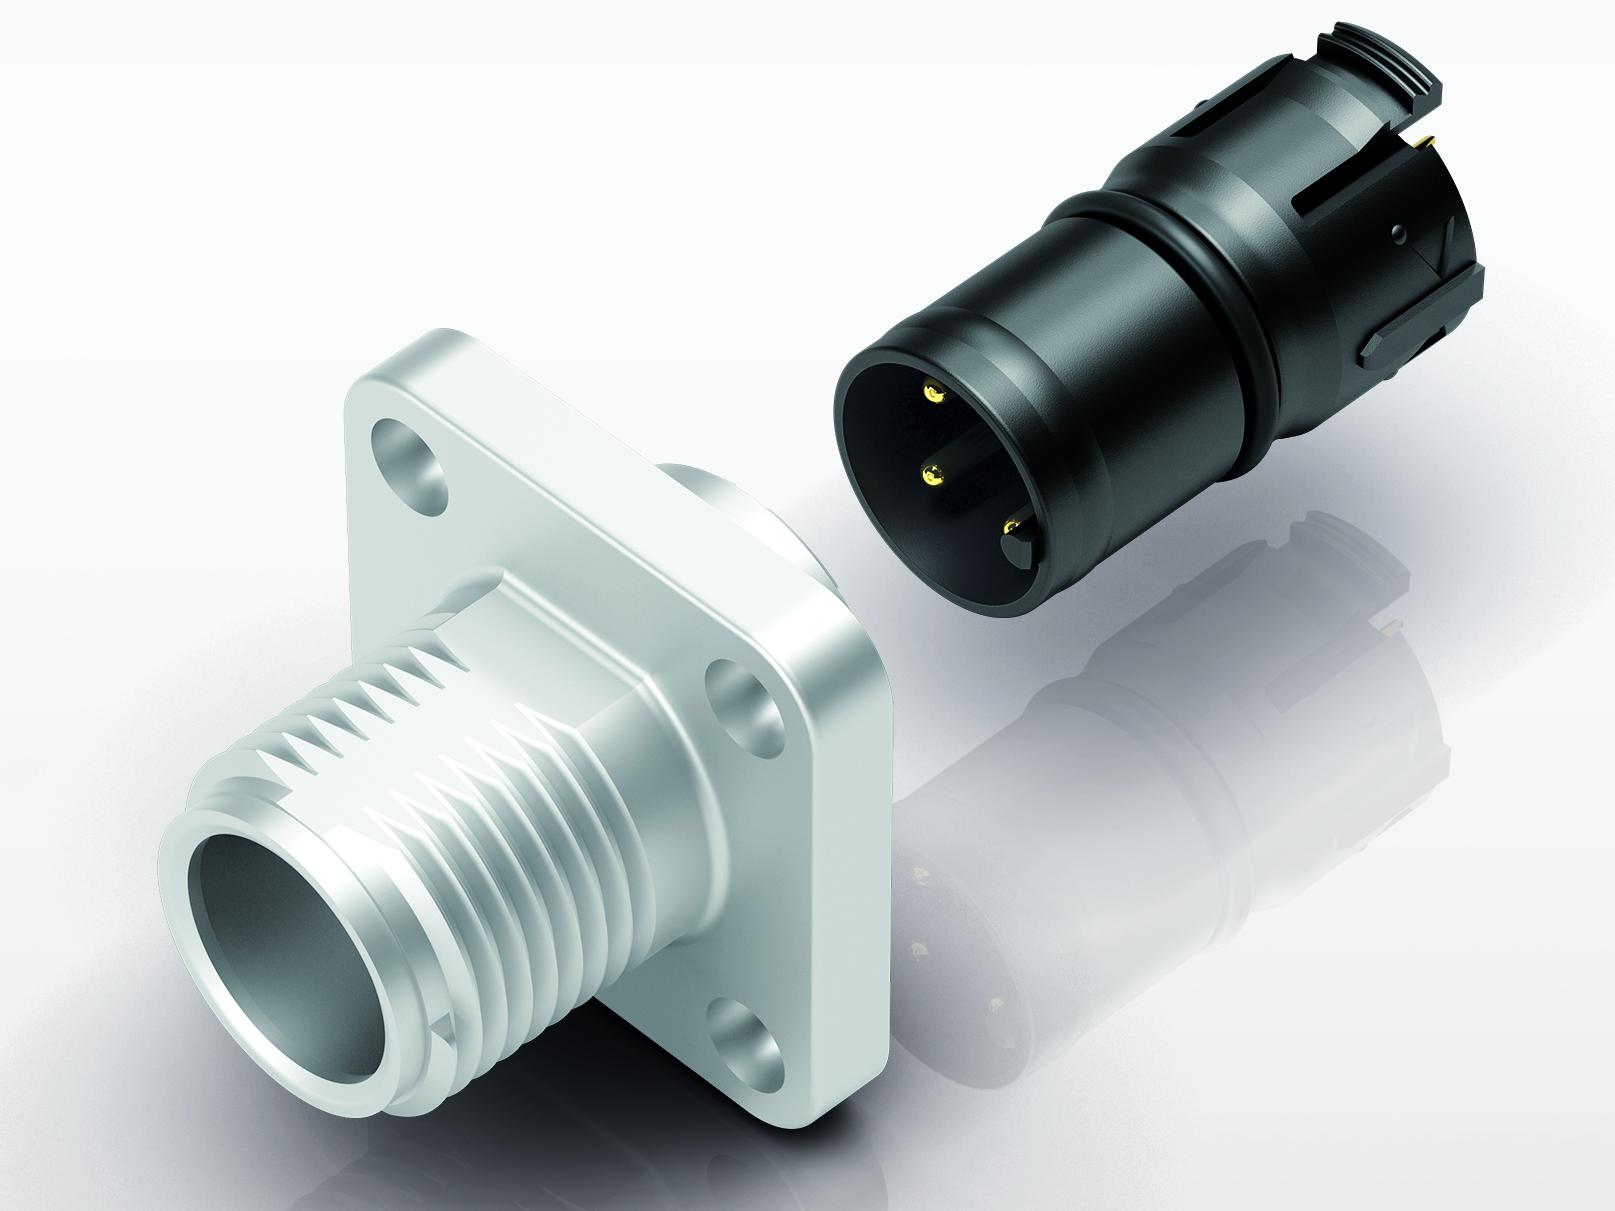 'A' grade panel mount connectors released